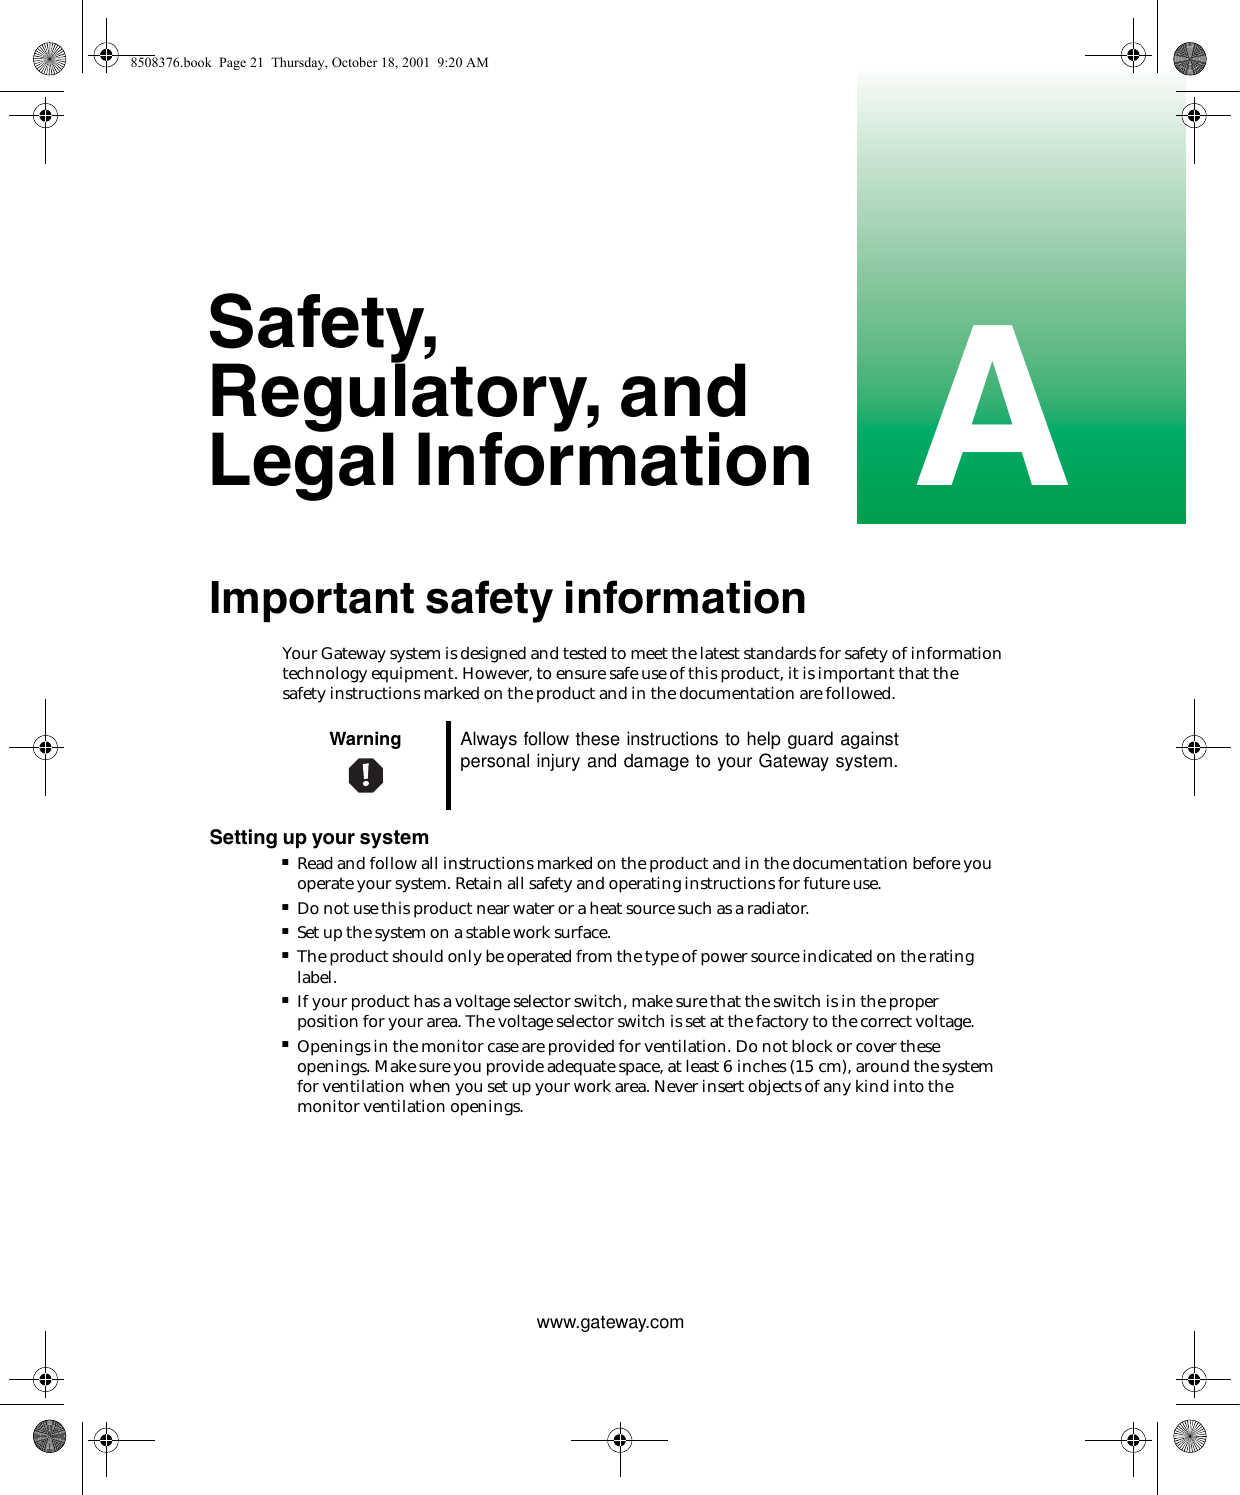 Awww.gateway.comSafety, Regulatory, and Legal InformationImportant safety informationYour Gateway system is designed and tested to meet the latest standards for safety of information technology equipment. However, to ensure safe use of this product, it is important that the safety instructions marked on the product and in the documentation are followed.Setting up your system■Read and follow all instructions marked on the product and in the documentation before you operate your system. Retain all safety and operating instructions for future use.■Do not use this product near water or a heat source such as a radiator.■Set up the system on a stable work surface.■The product should only be operated from the type of power source indicated on the rating label.■If your product has a voltage selector switch, make sure that the switch is in the proper position for your area. The voltage selector switch is set at the factory to the correct voltage.■Openings in the monitor case are provided for ventilation. Do not block or cover these openings. Make sure you provide adequate space, at least 6 inches (15 cm), around the system for ventilation when you set up your work area. Never insert objects of any kind into the monitor ventilation openings.Warning Always follow these instructions to help guard against personal injury and damage to your Gateway system.8508376.book  Page 21  Thursday, October 18, 2001  9:20 AM